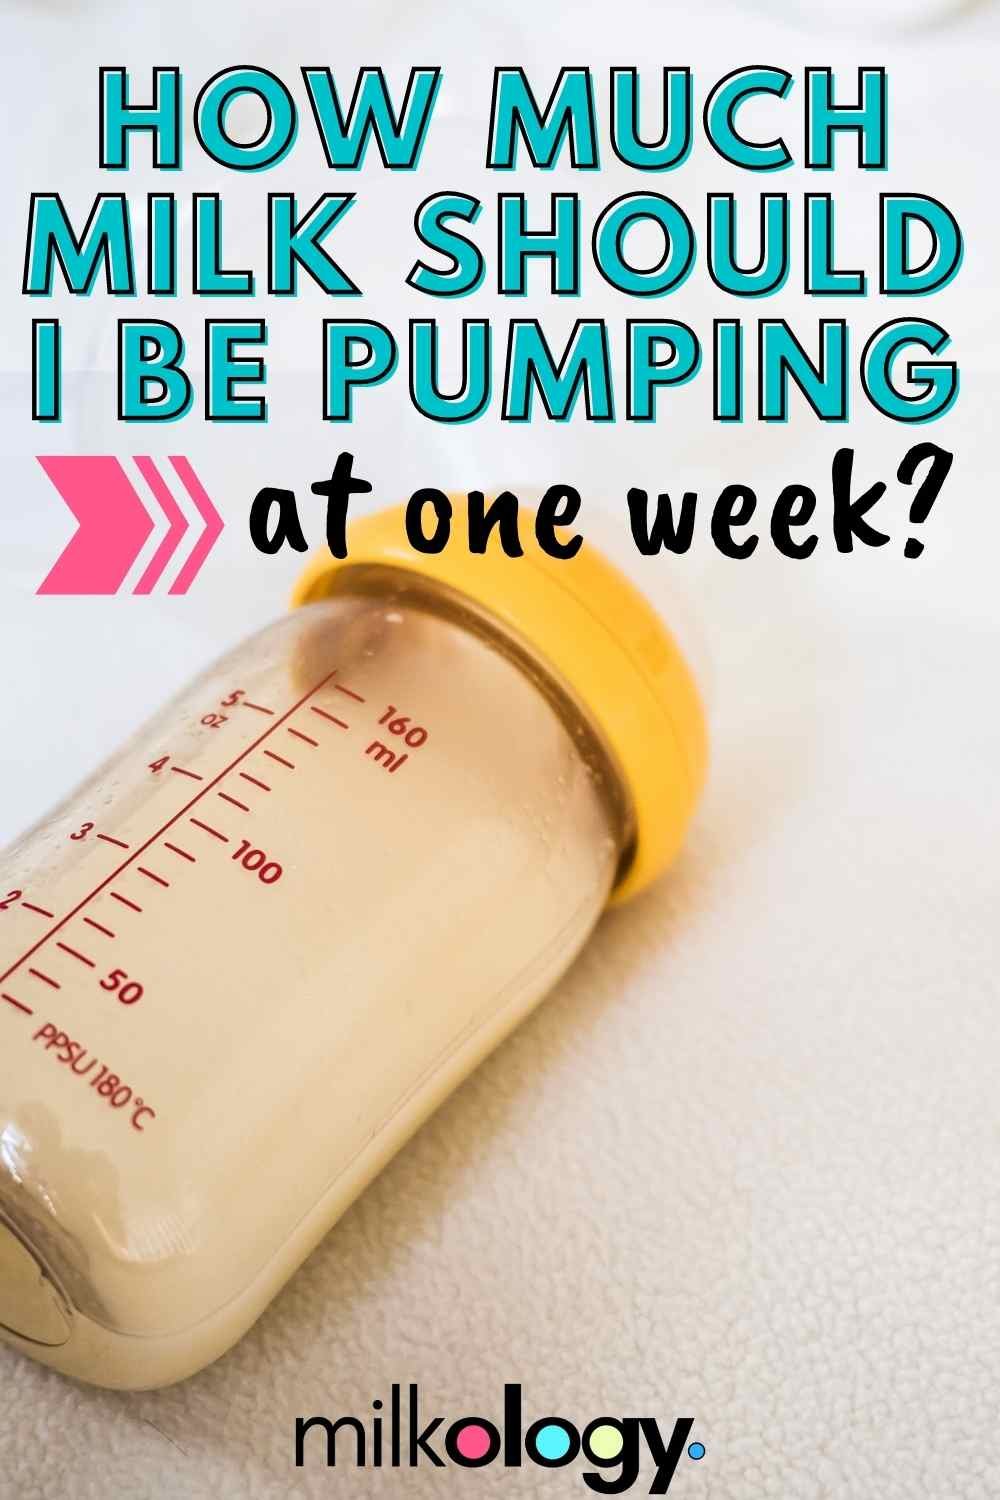 The 10 Biggest Exclusive Pumping Mistakes - Exclusive Pumping